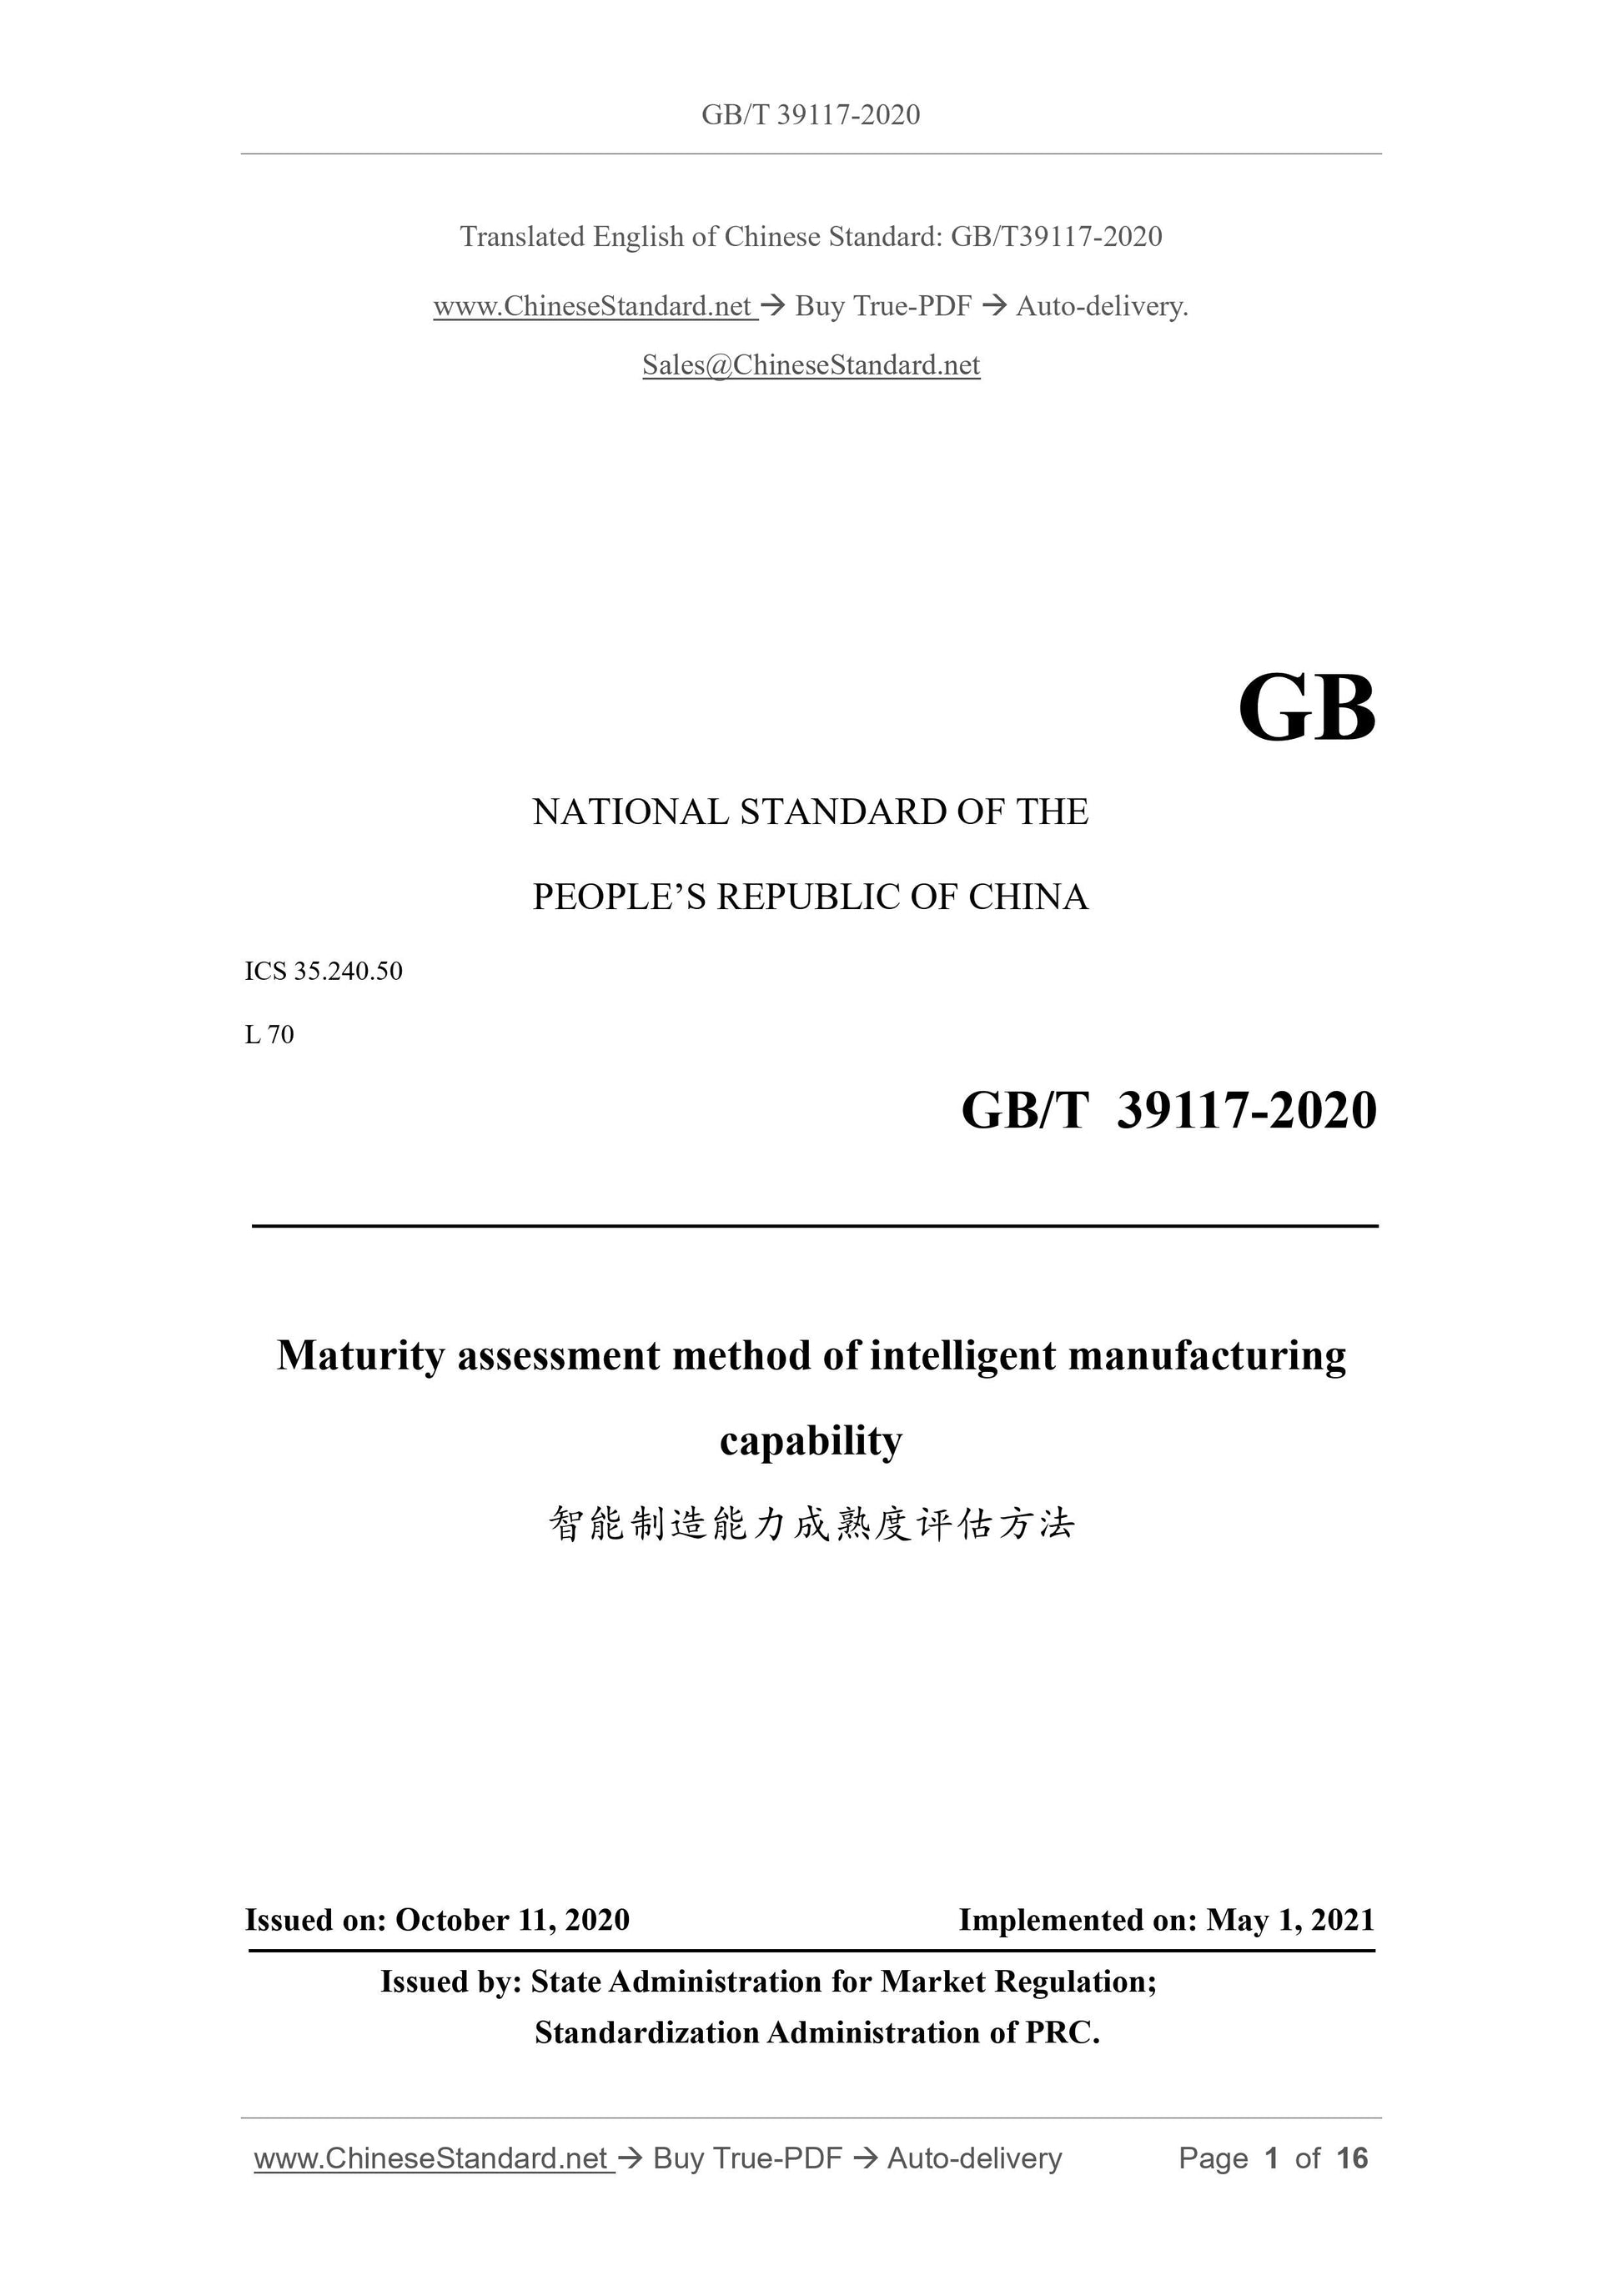 GB/T 39117-2020 Page 1